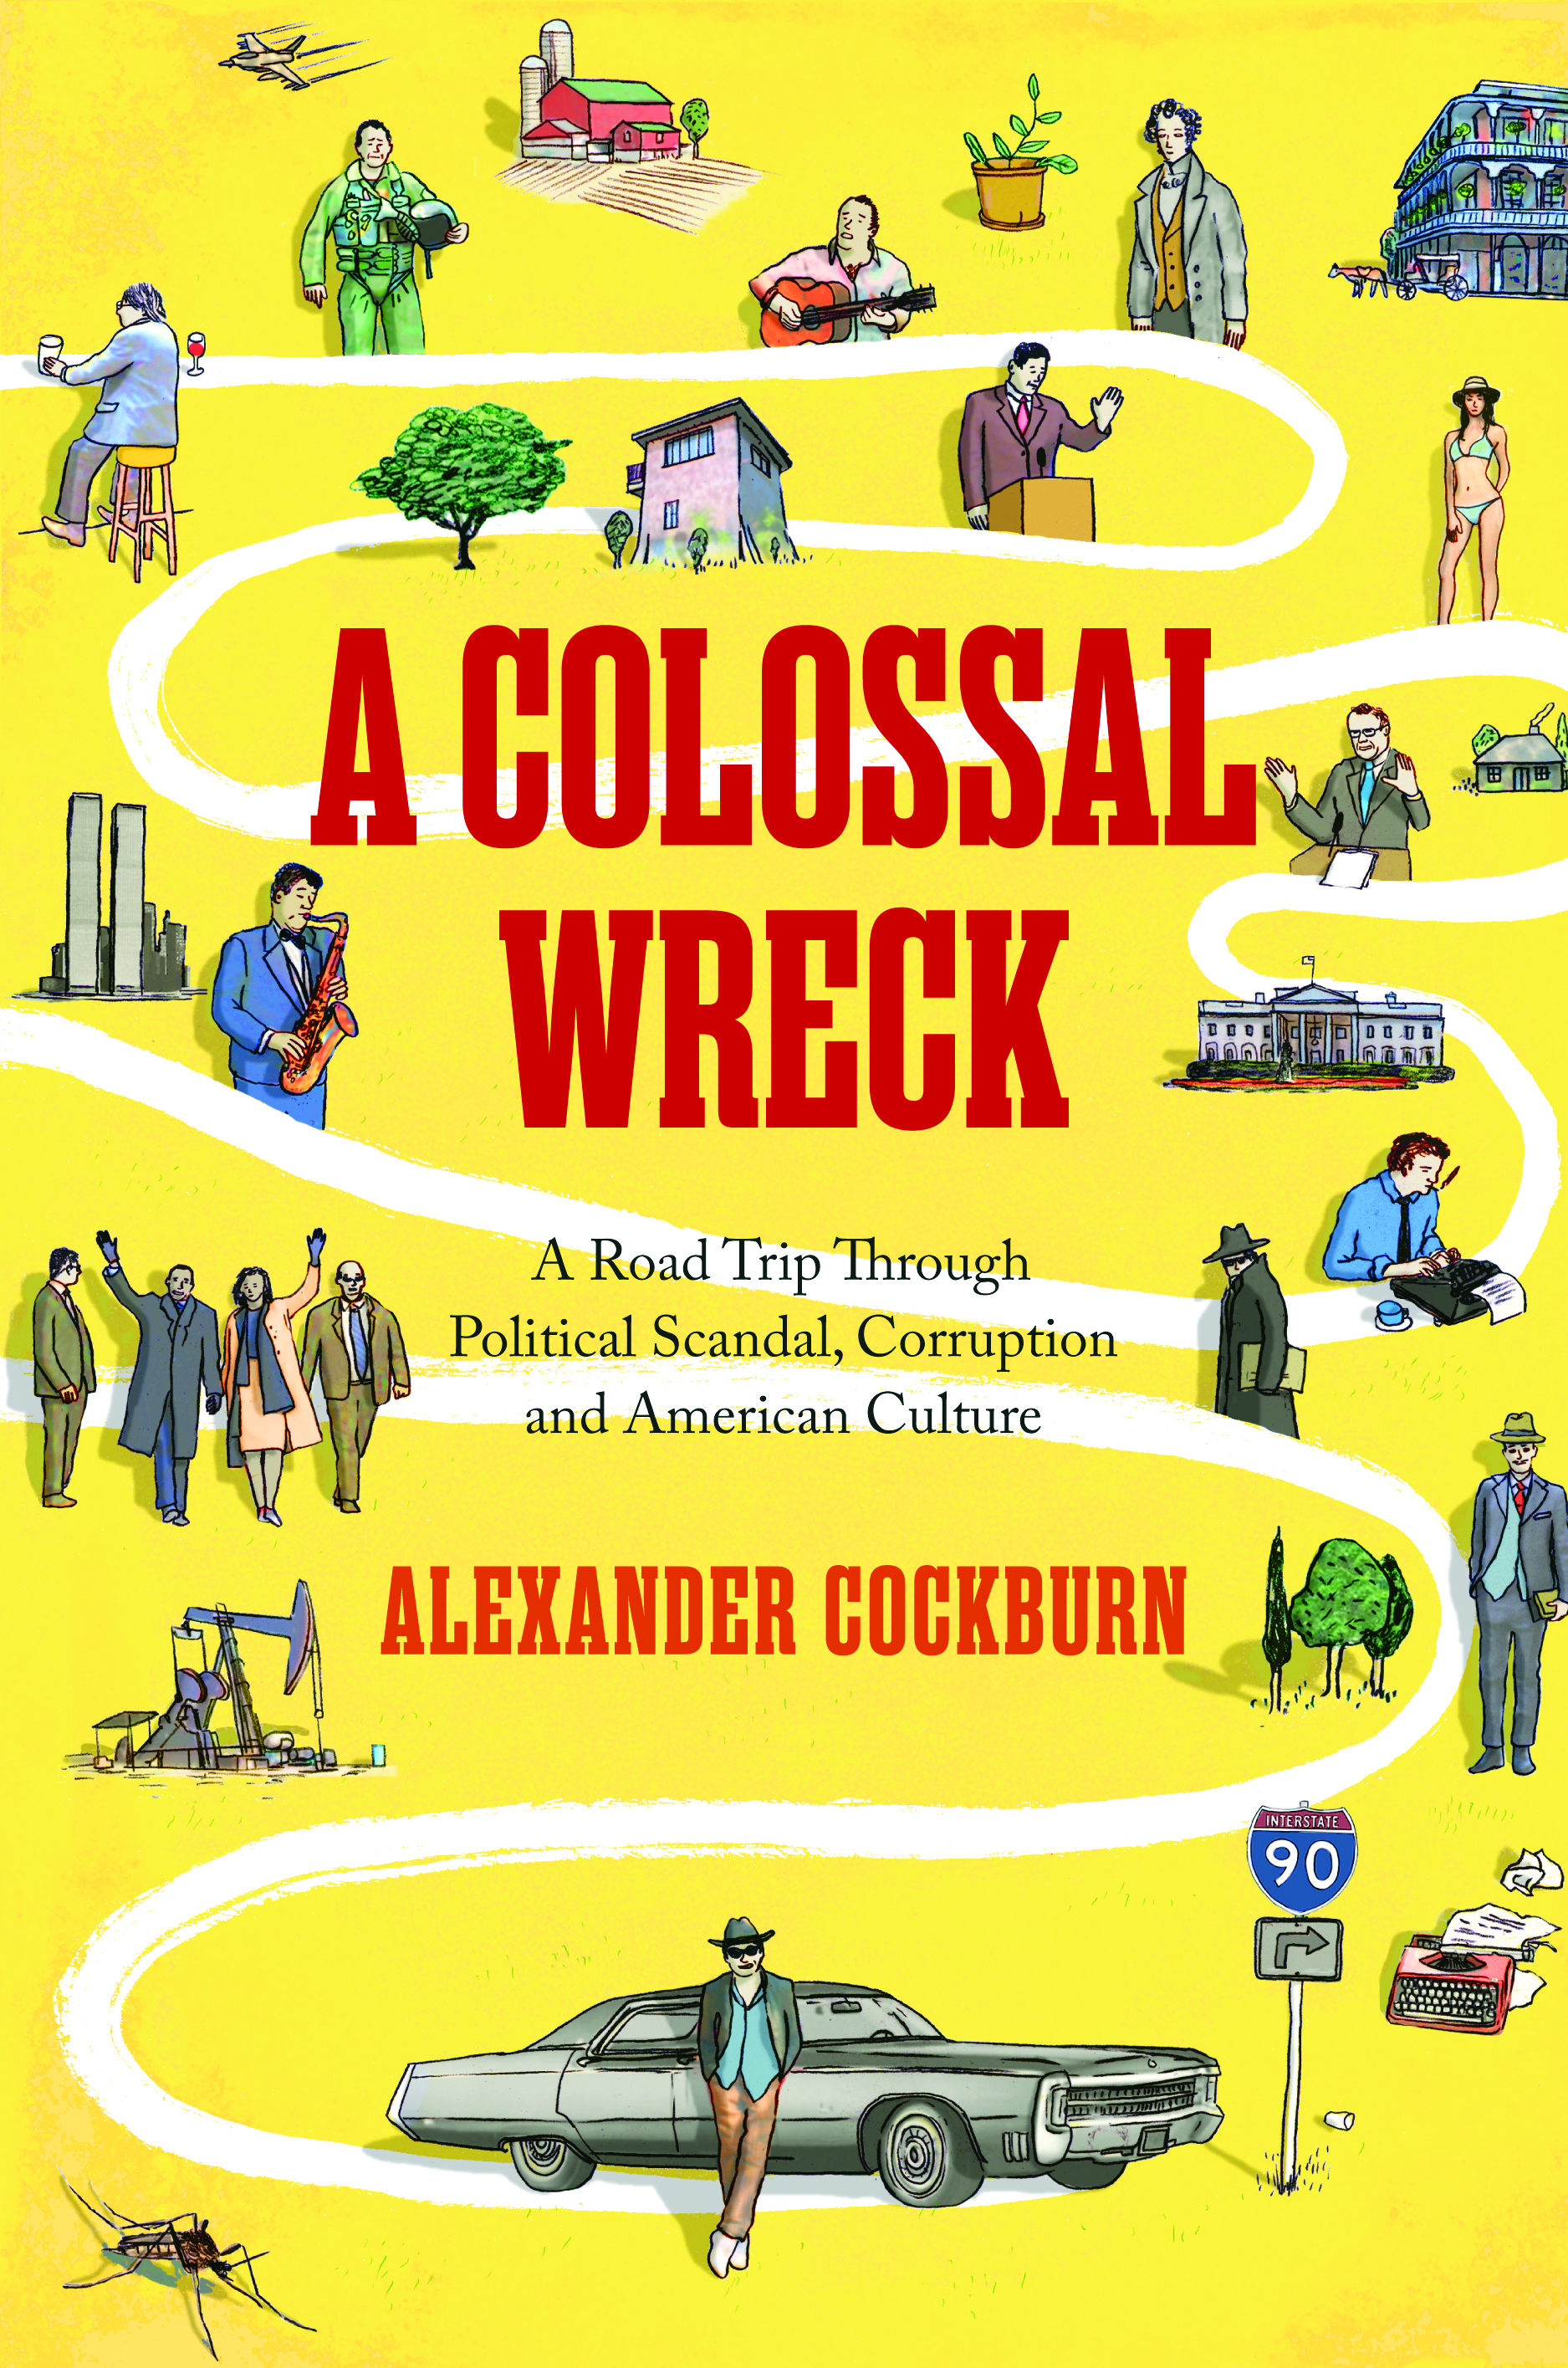 Brooklyn Book Festival Bookend Event: Book Launch & Tribute: A Colossal Wreck by Alexander Cockburn, with Laura Flanders, Daisy Cockburn, Laura Flanders, Andrew Cockburn, Doug Henwood, and Connor Kilpatrick